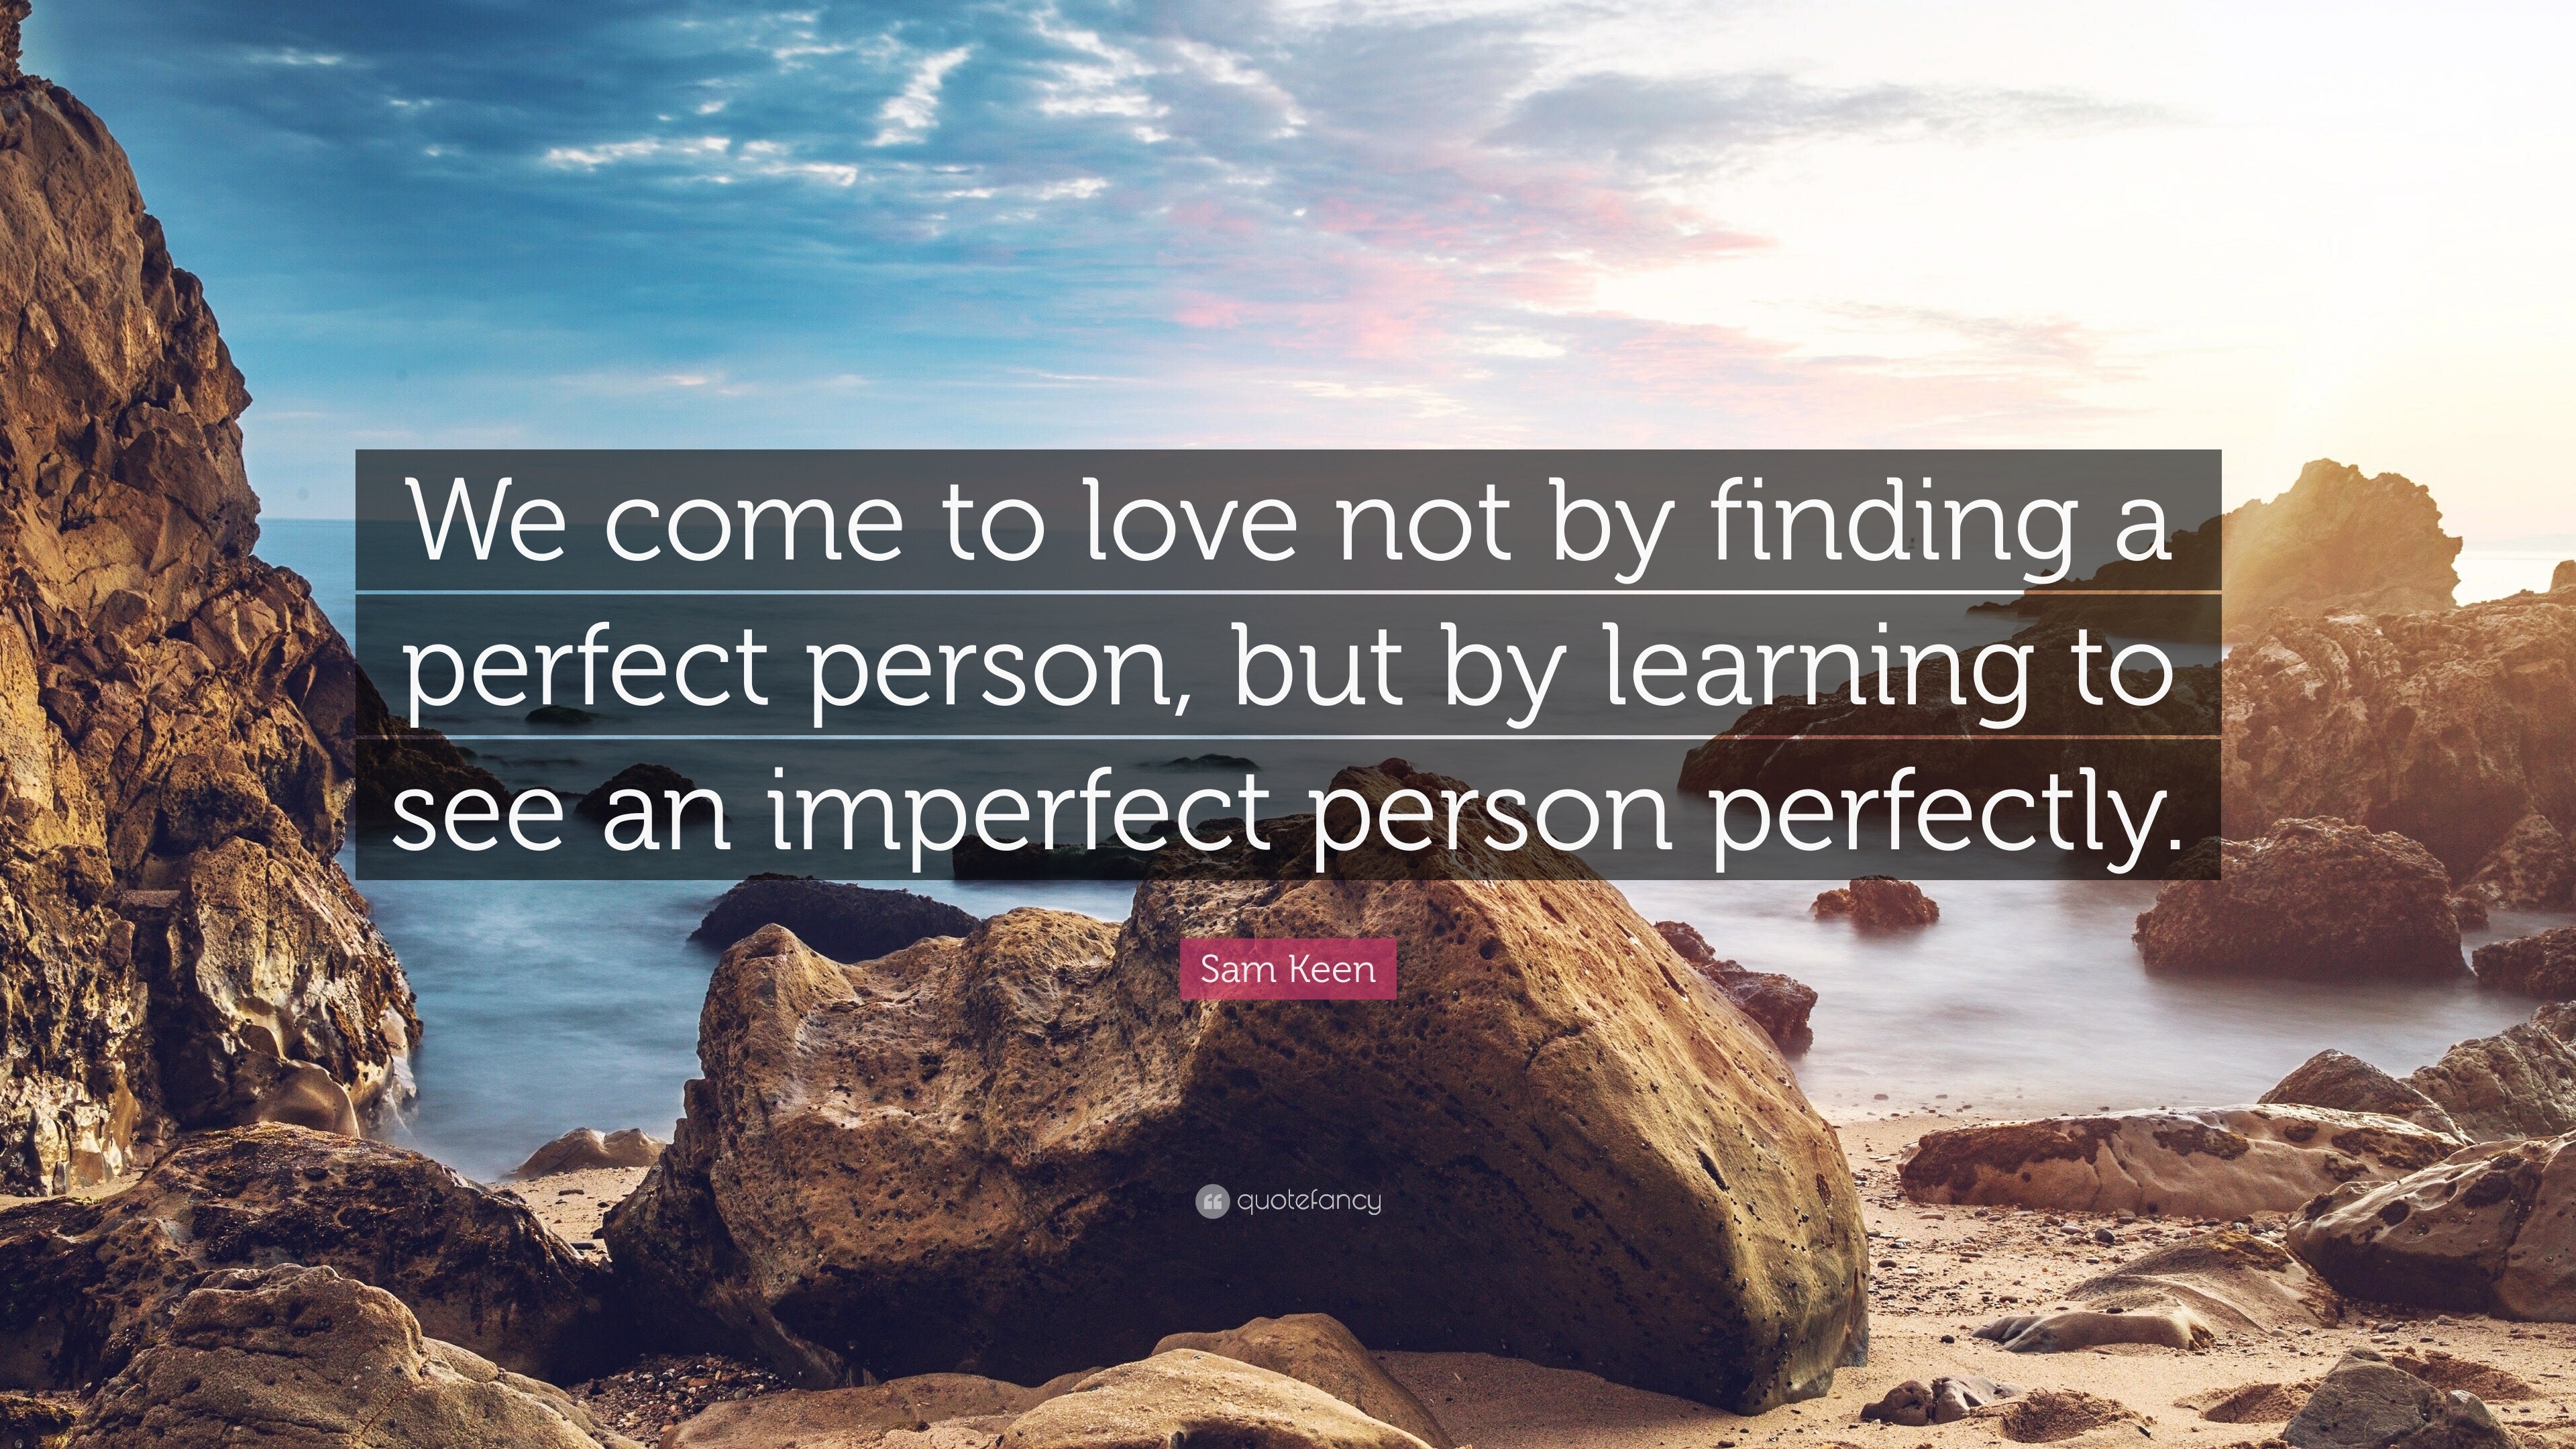 https://quotefancy.com/media/wallpaper/3840x2160/1787236-Sam-Keen-Quote-We-come-to-love-not-by-finding-a-perfect-person-but.jpg